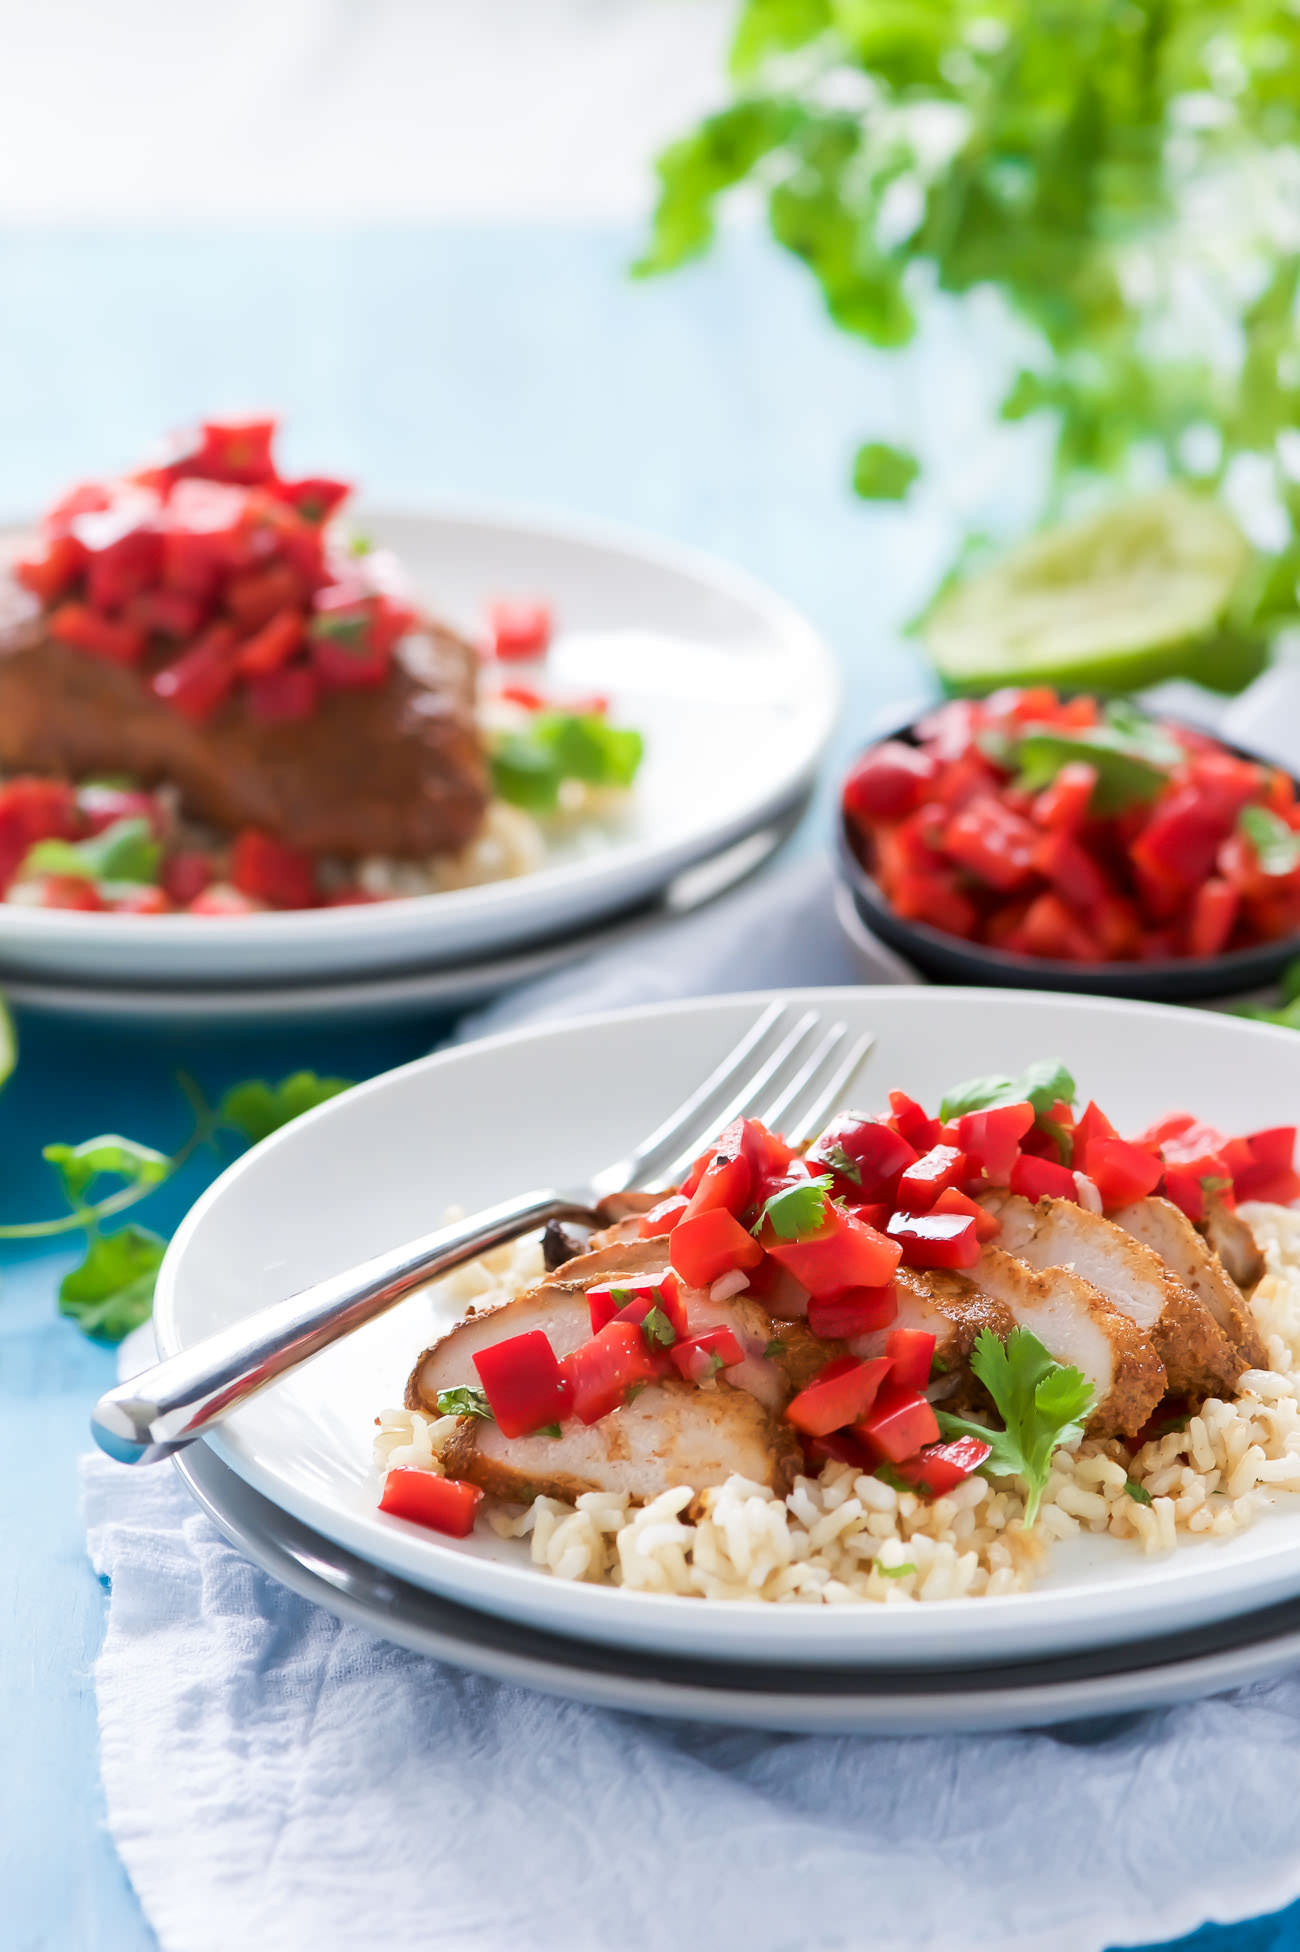 Tequila Honey Lime Chicken - juicy chicken marinated in a smoky chipotle, a touch of honey and chili powder then finished with a super quick and fresh red pepper salsa!